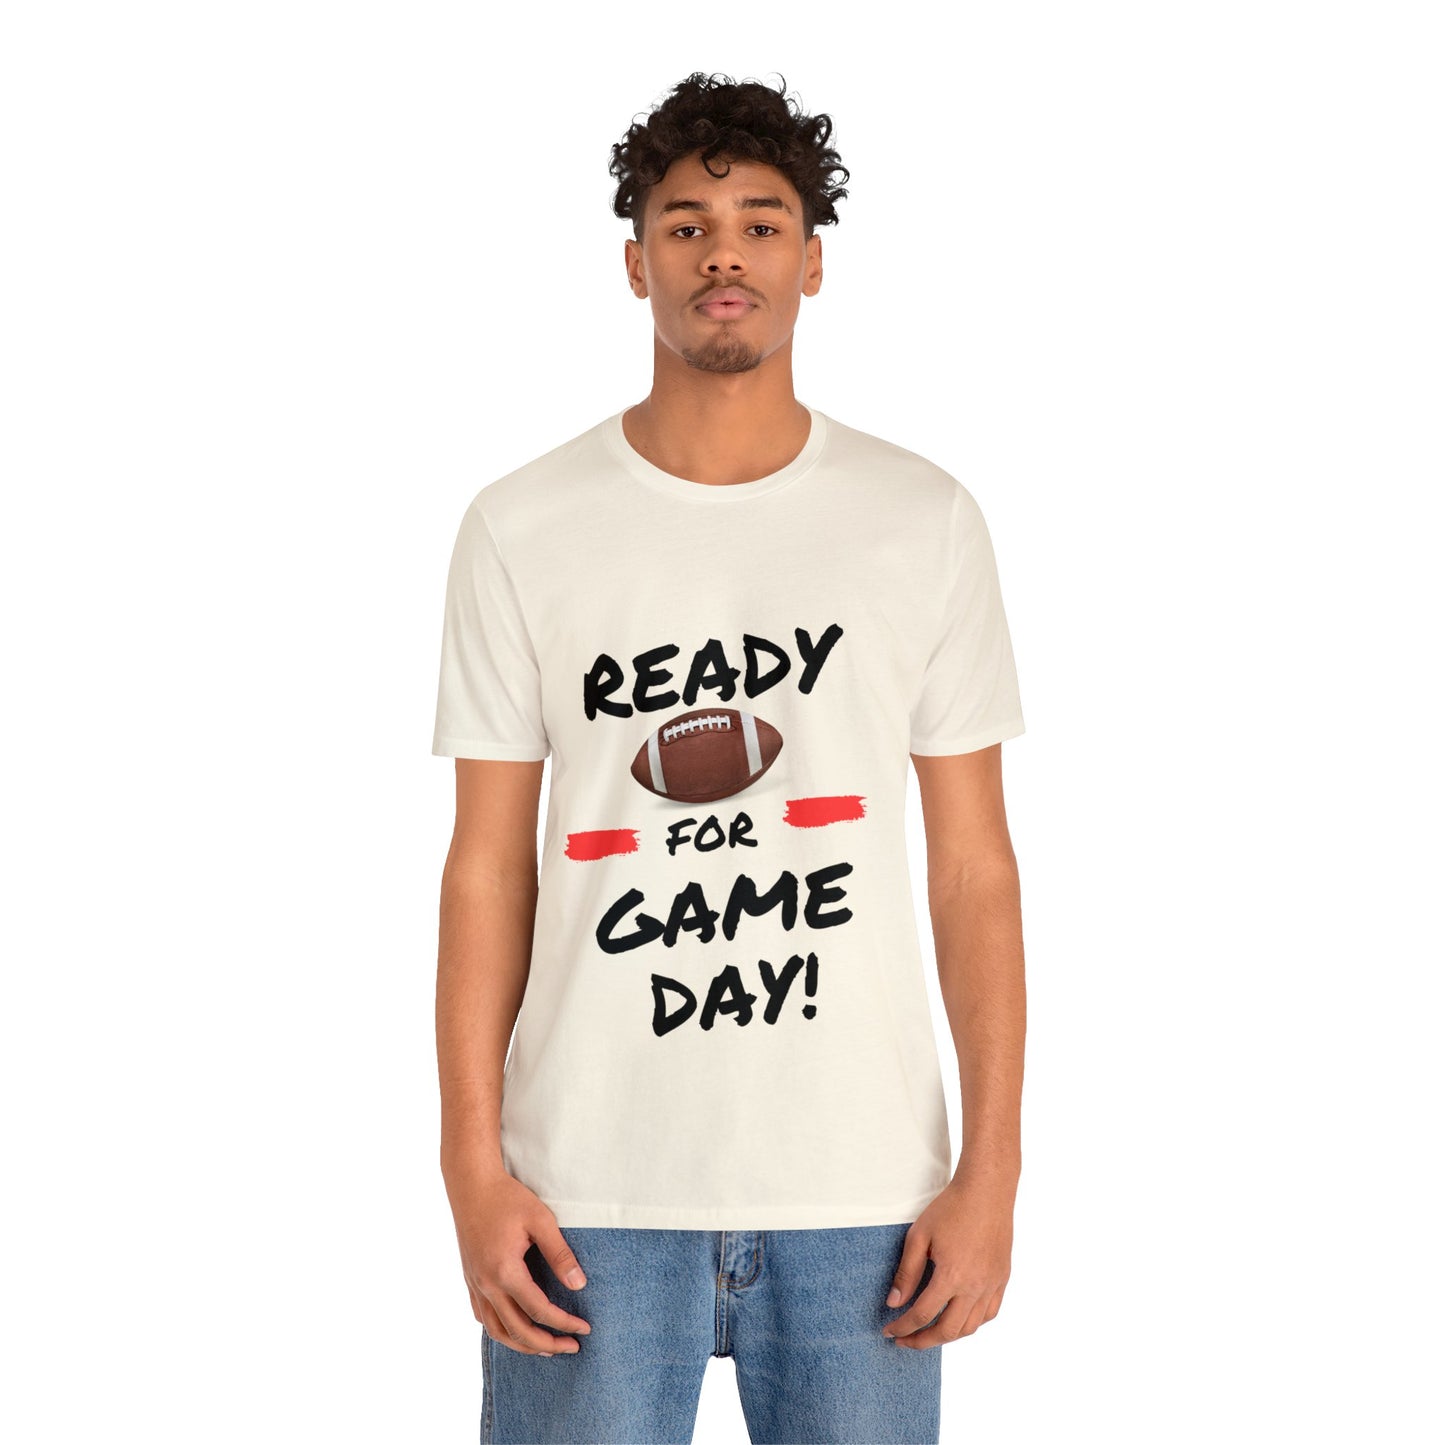 Game Day Unisex Jersey Short Sleeve Tee